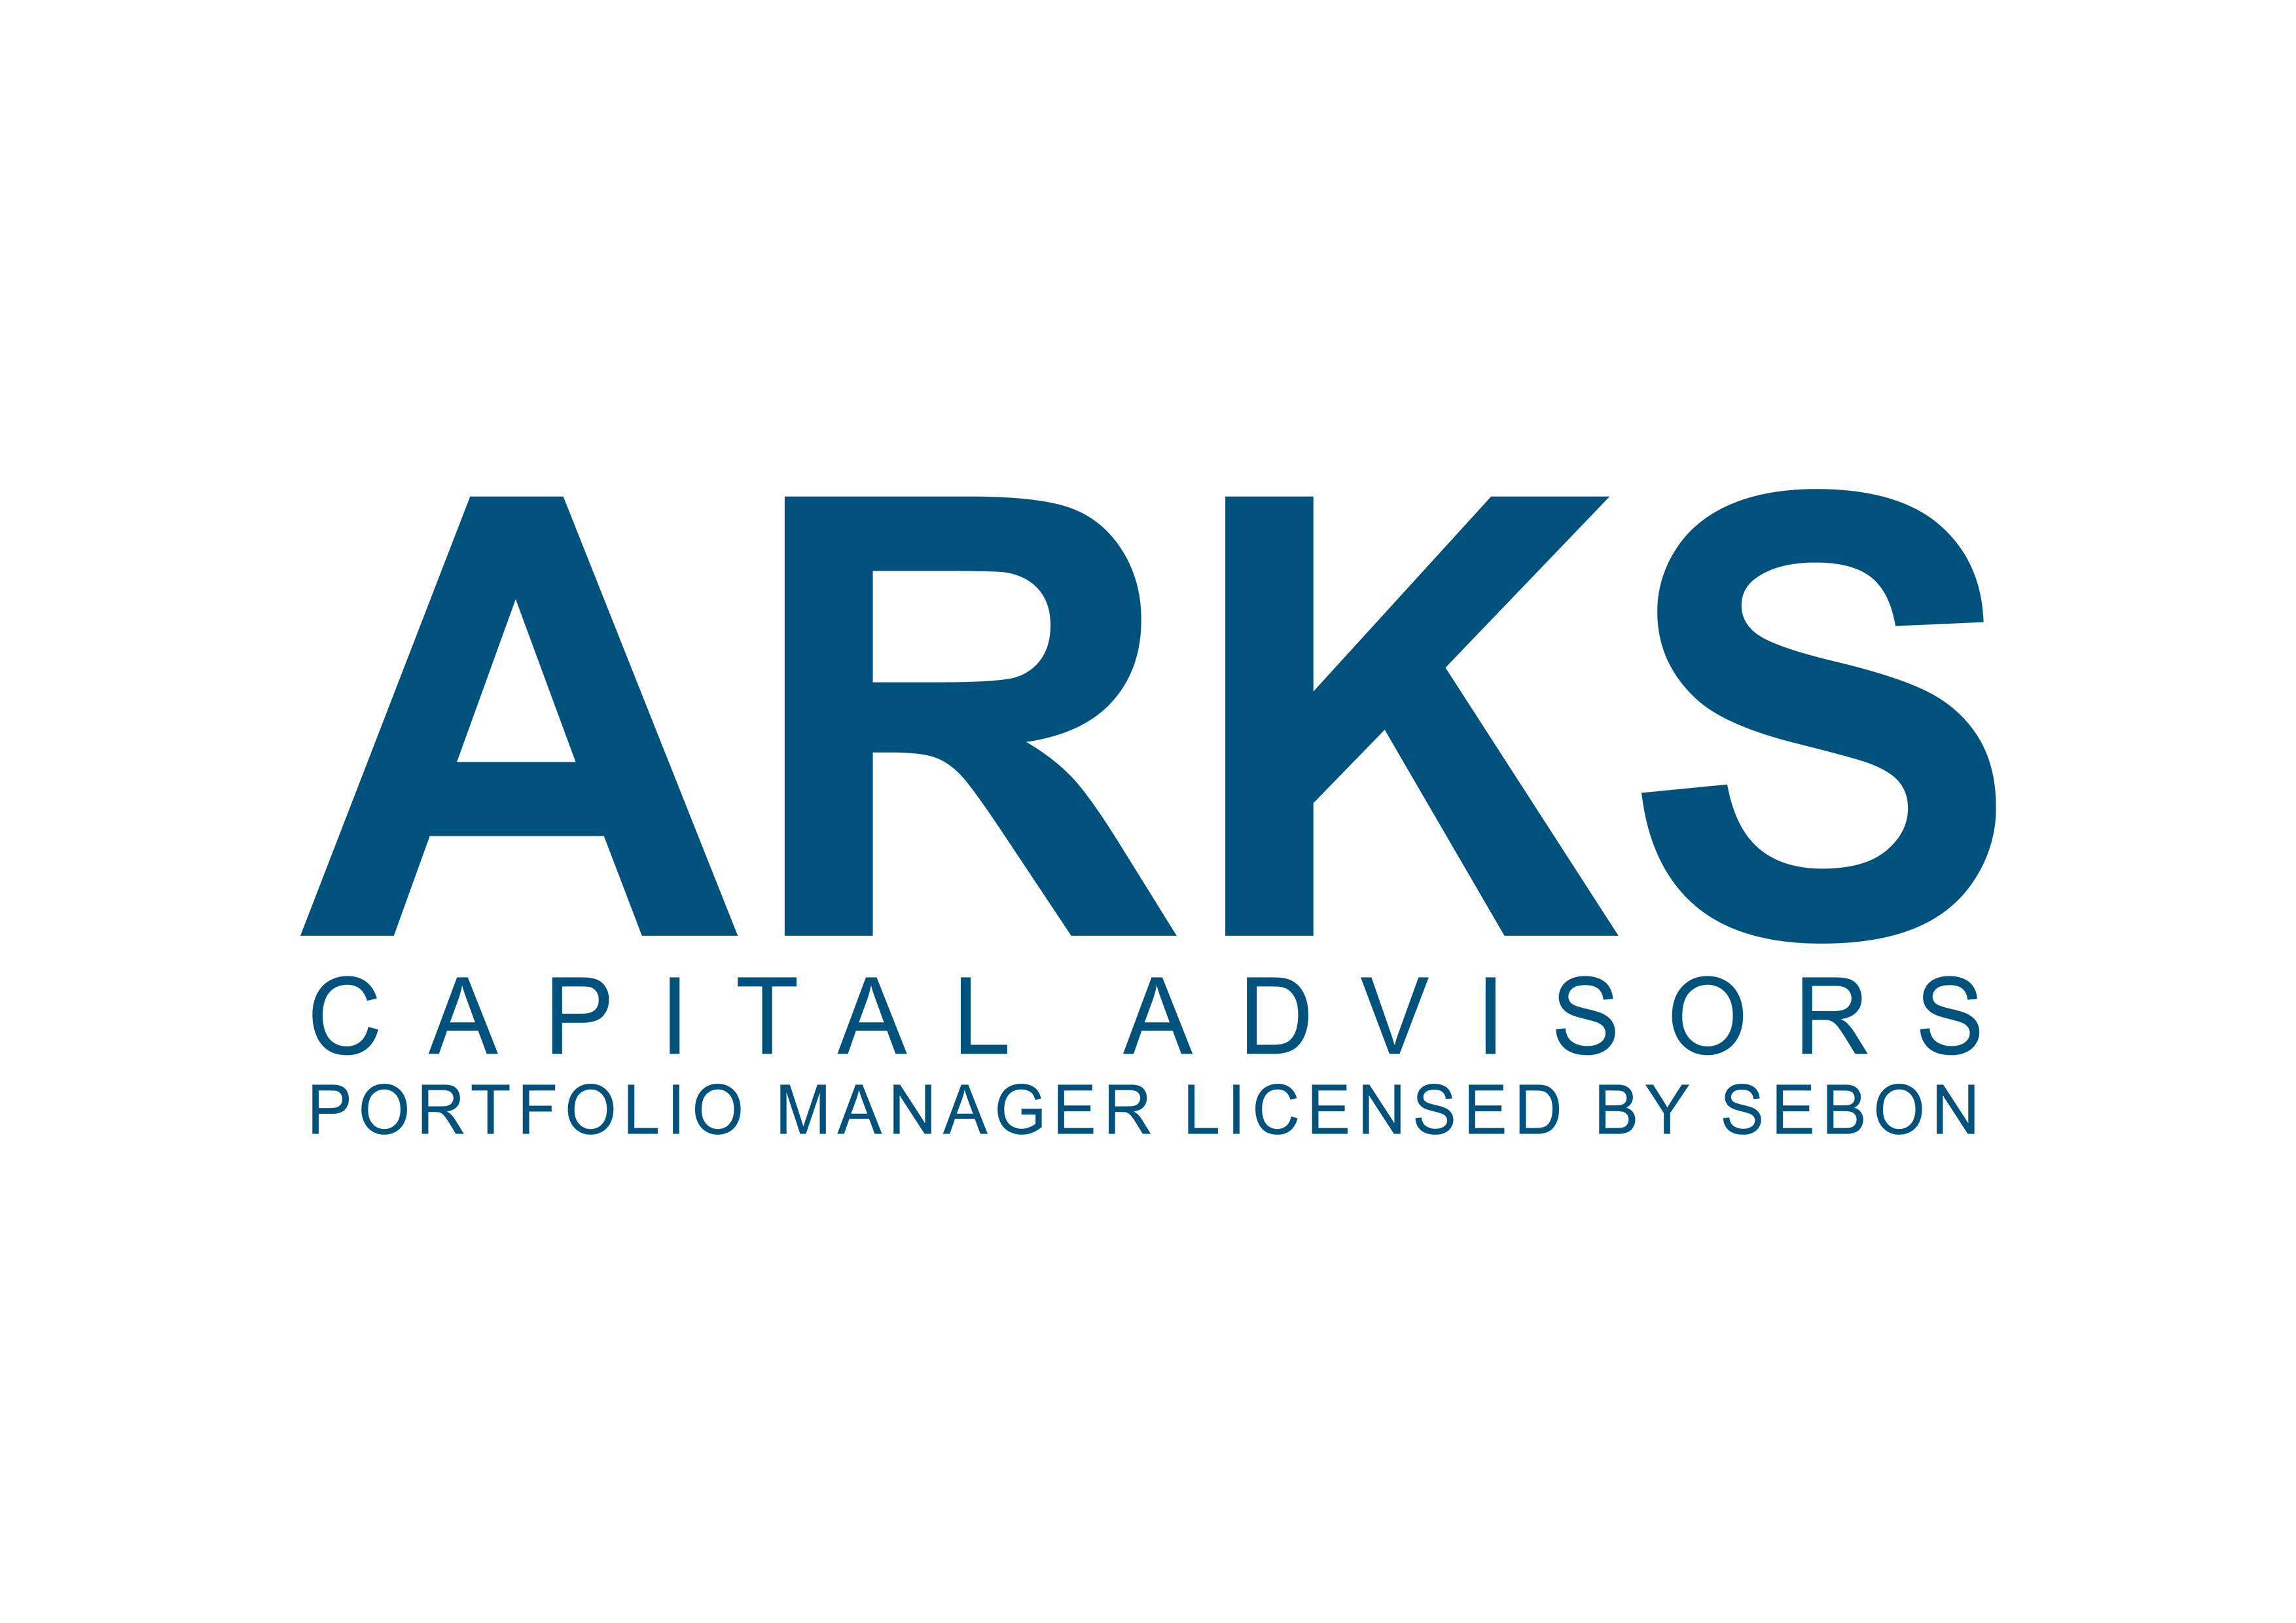 ARKS Capital Limited.